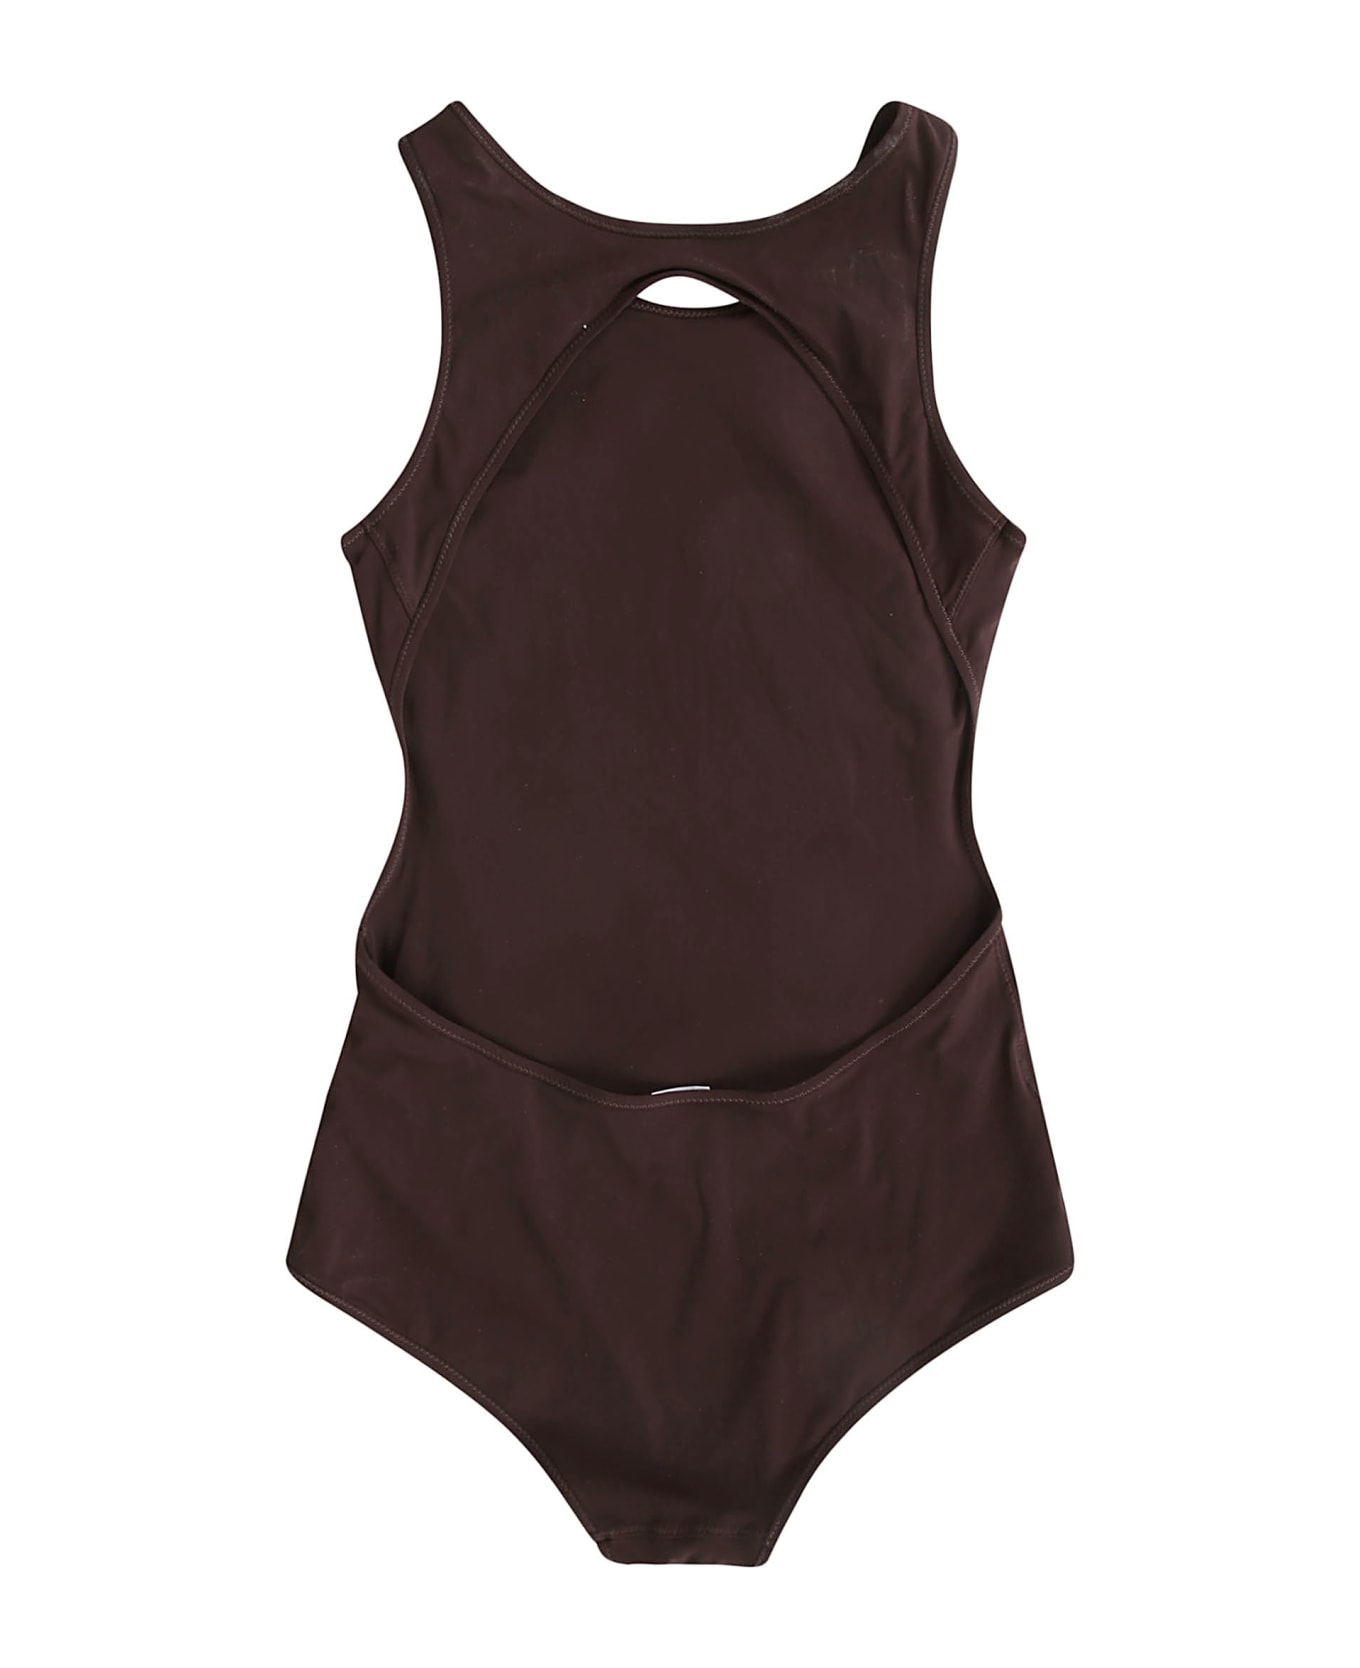 Jil Sander Sports Swimsuit Crew Neck With Open Back - Earth